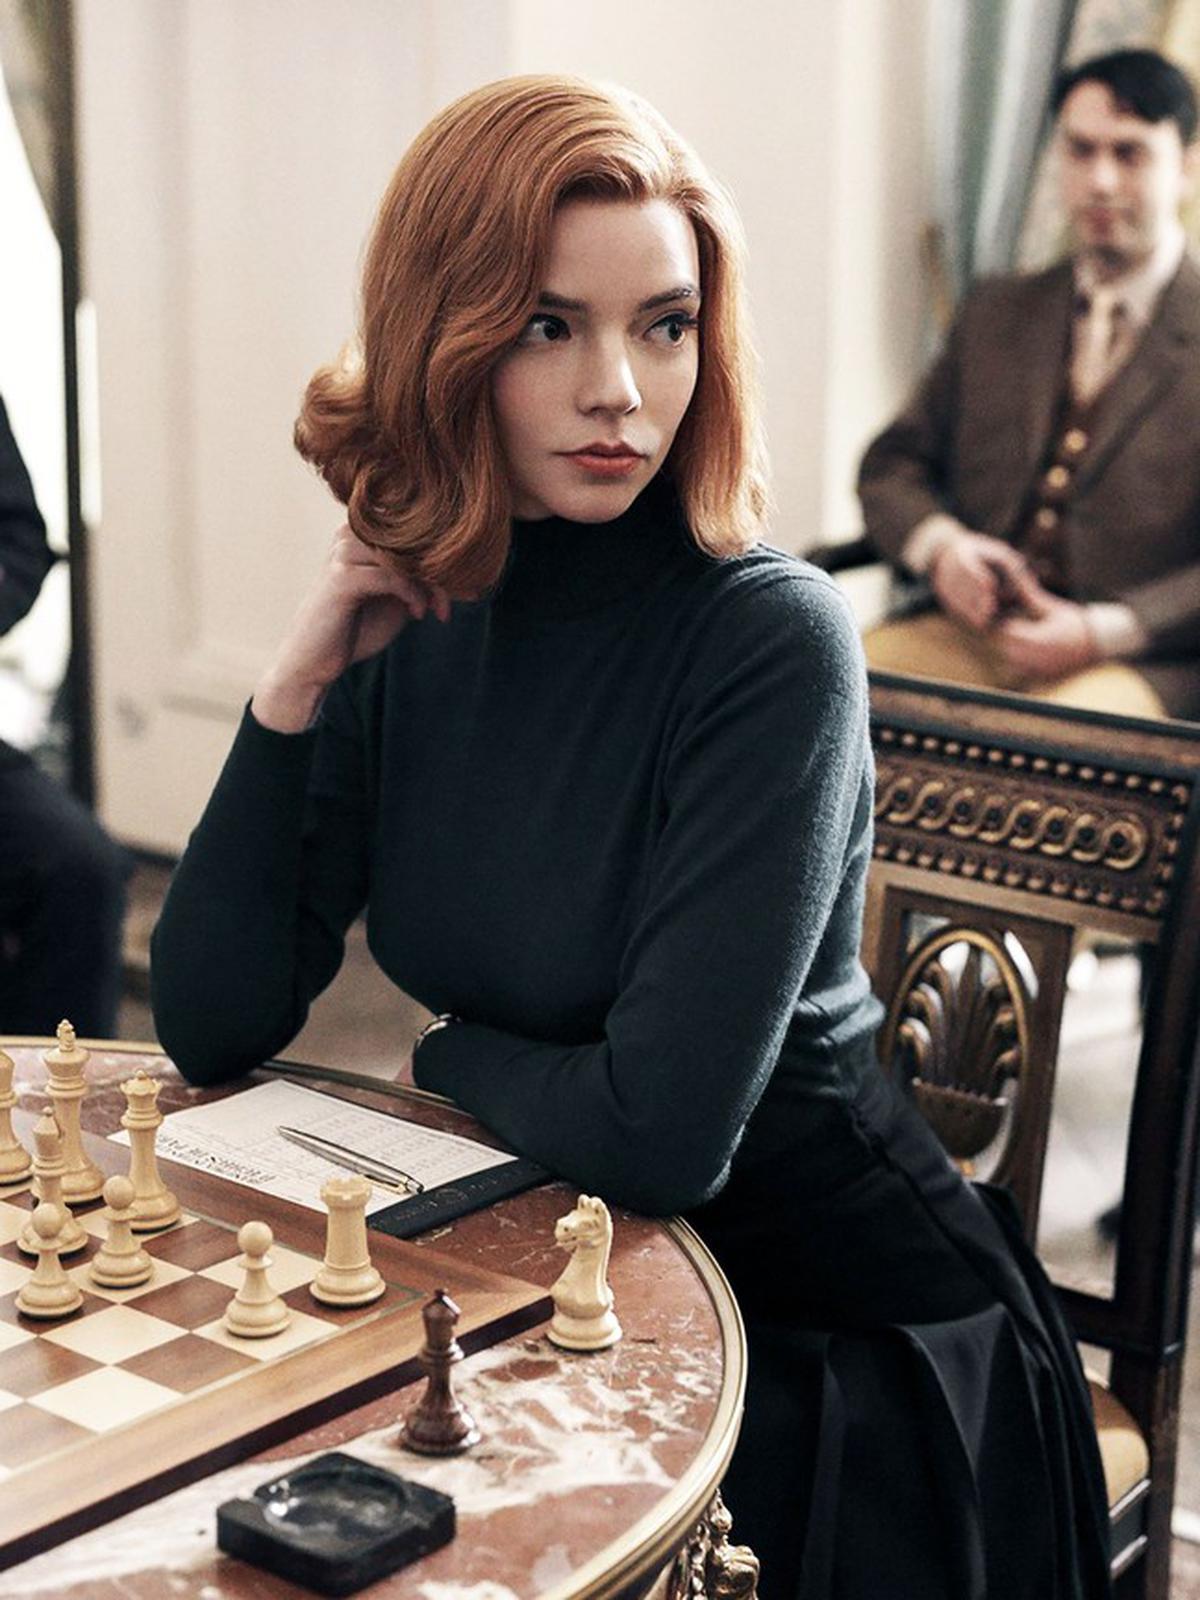 Anya Taylor-Joy as Beth Harmon, a gifted young chess player, in Netflix miniseries 'The Queen's Gambit'. 